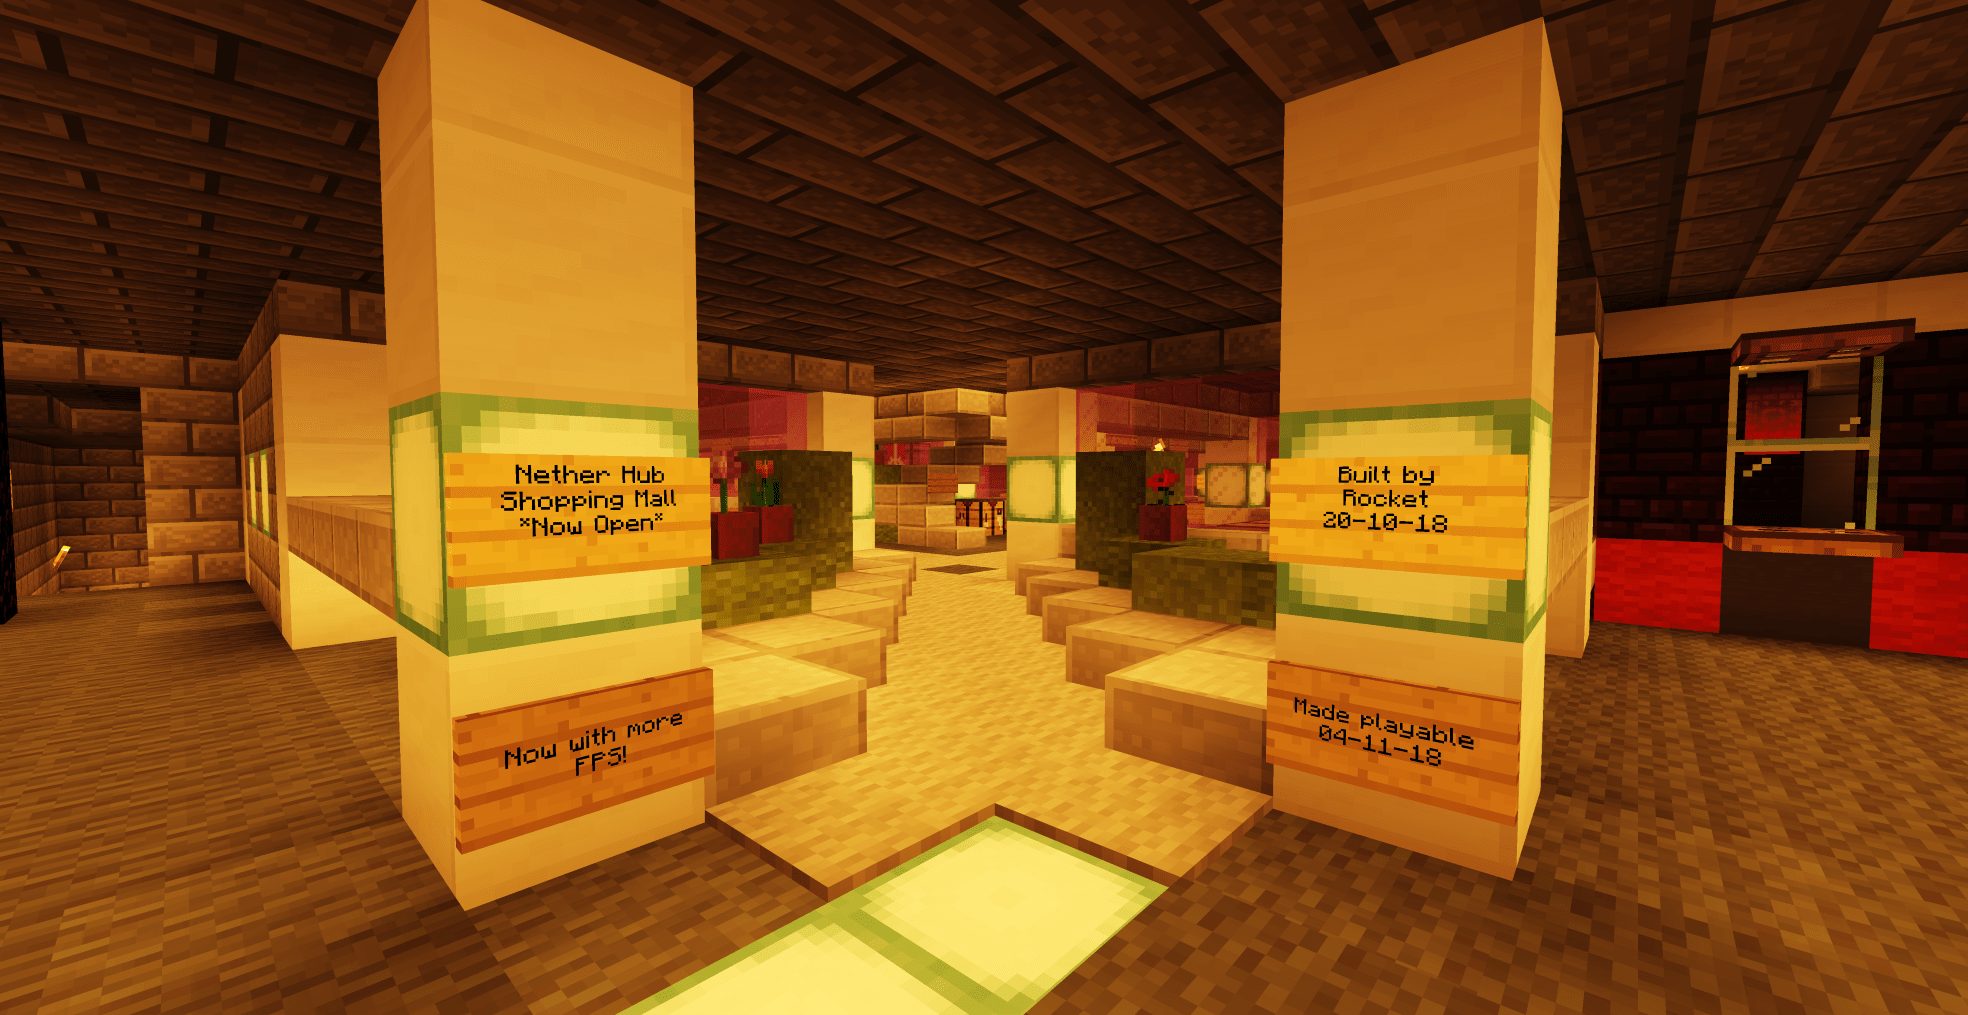 The Old Nether Hub Mall